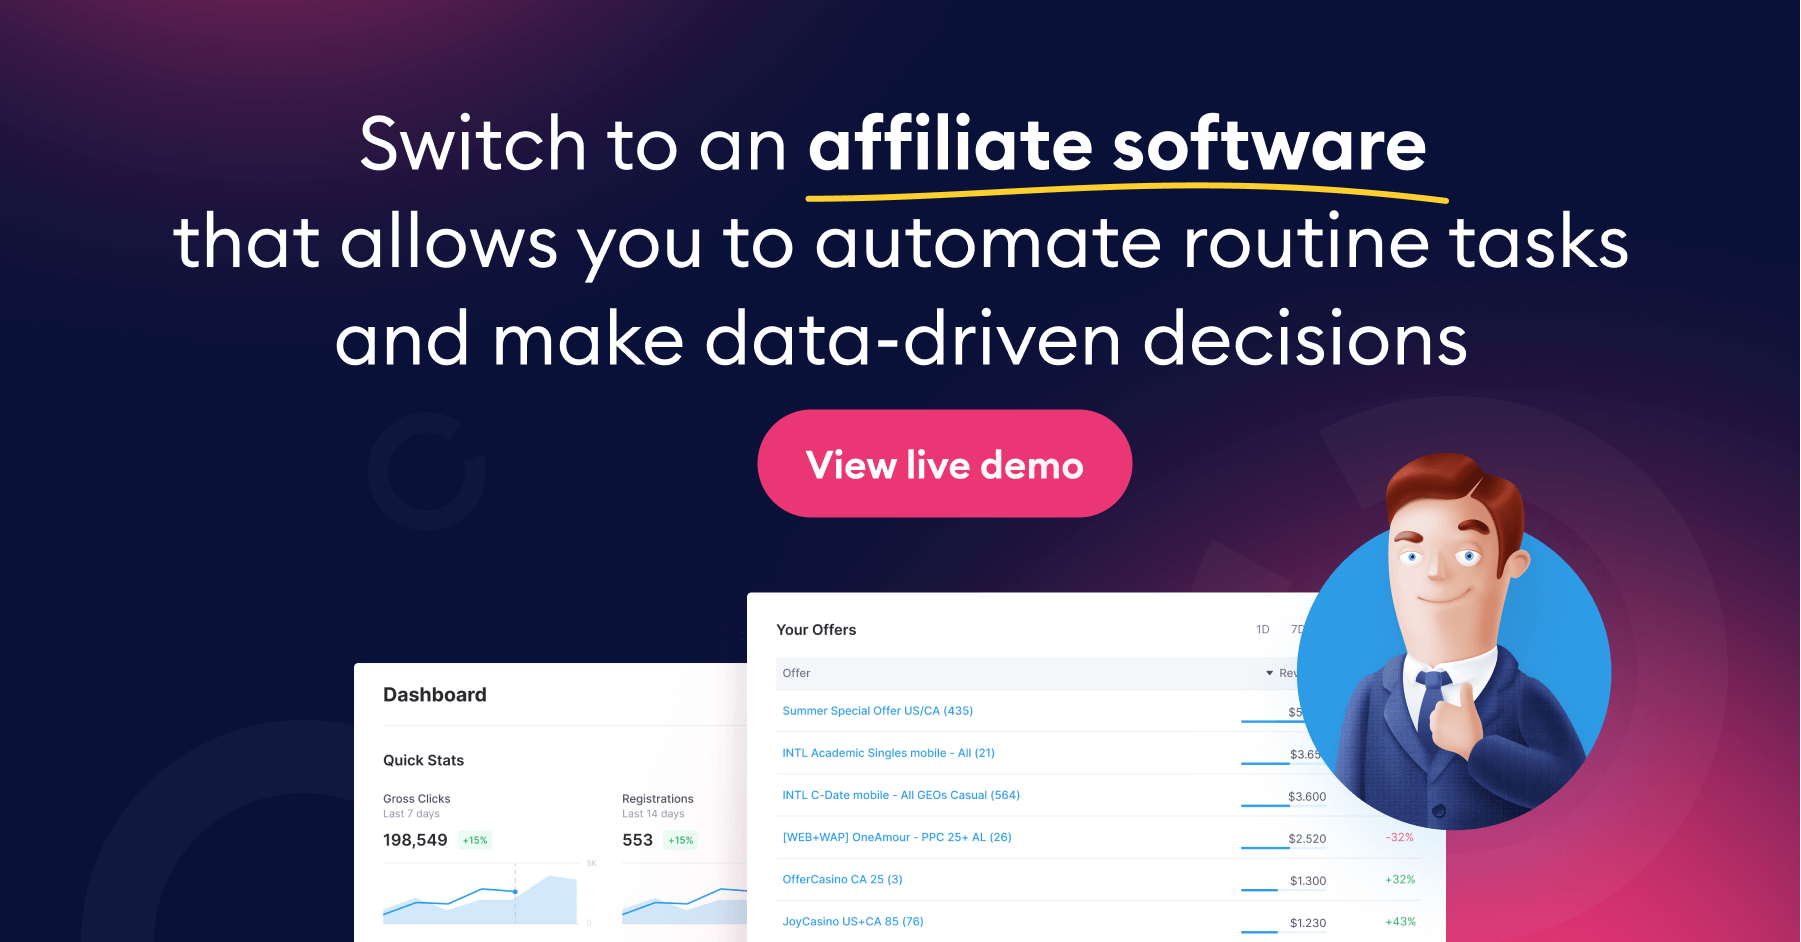 Scaleo -switch to an automated affiliate software that allows you to automate routine tasks and make data driven decisions.